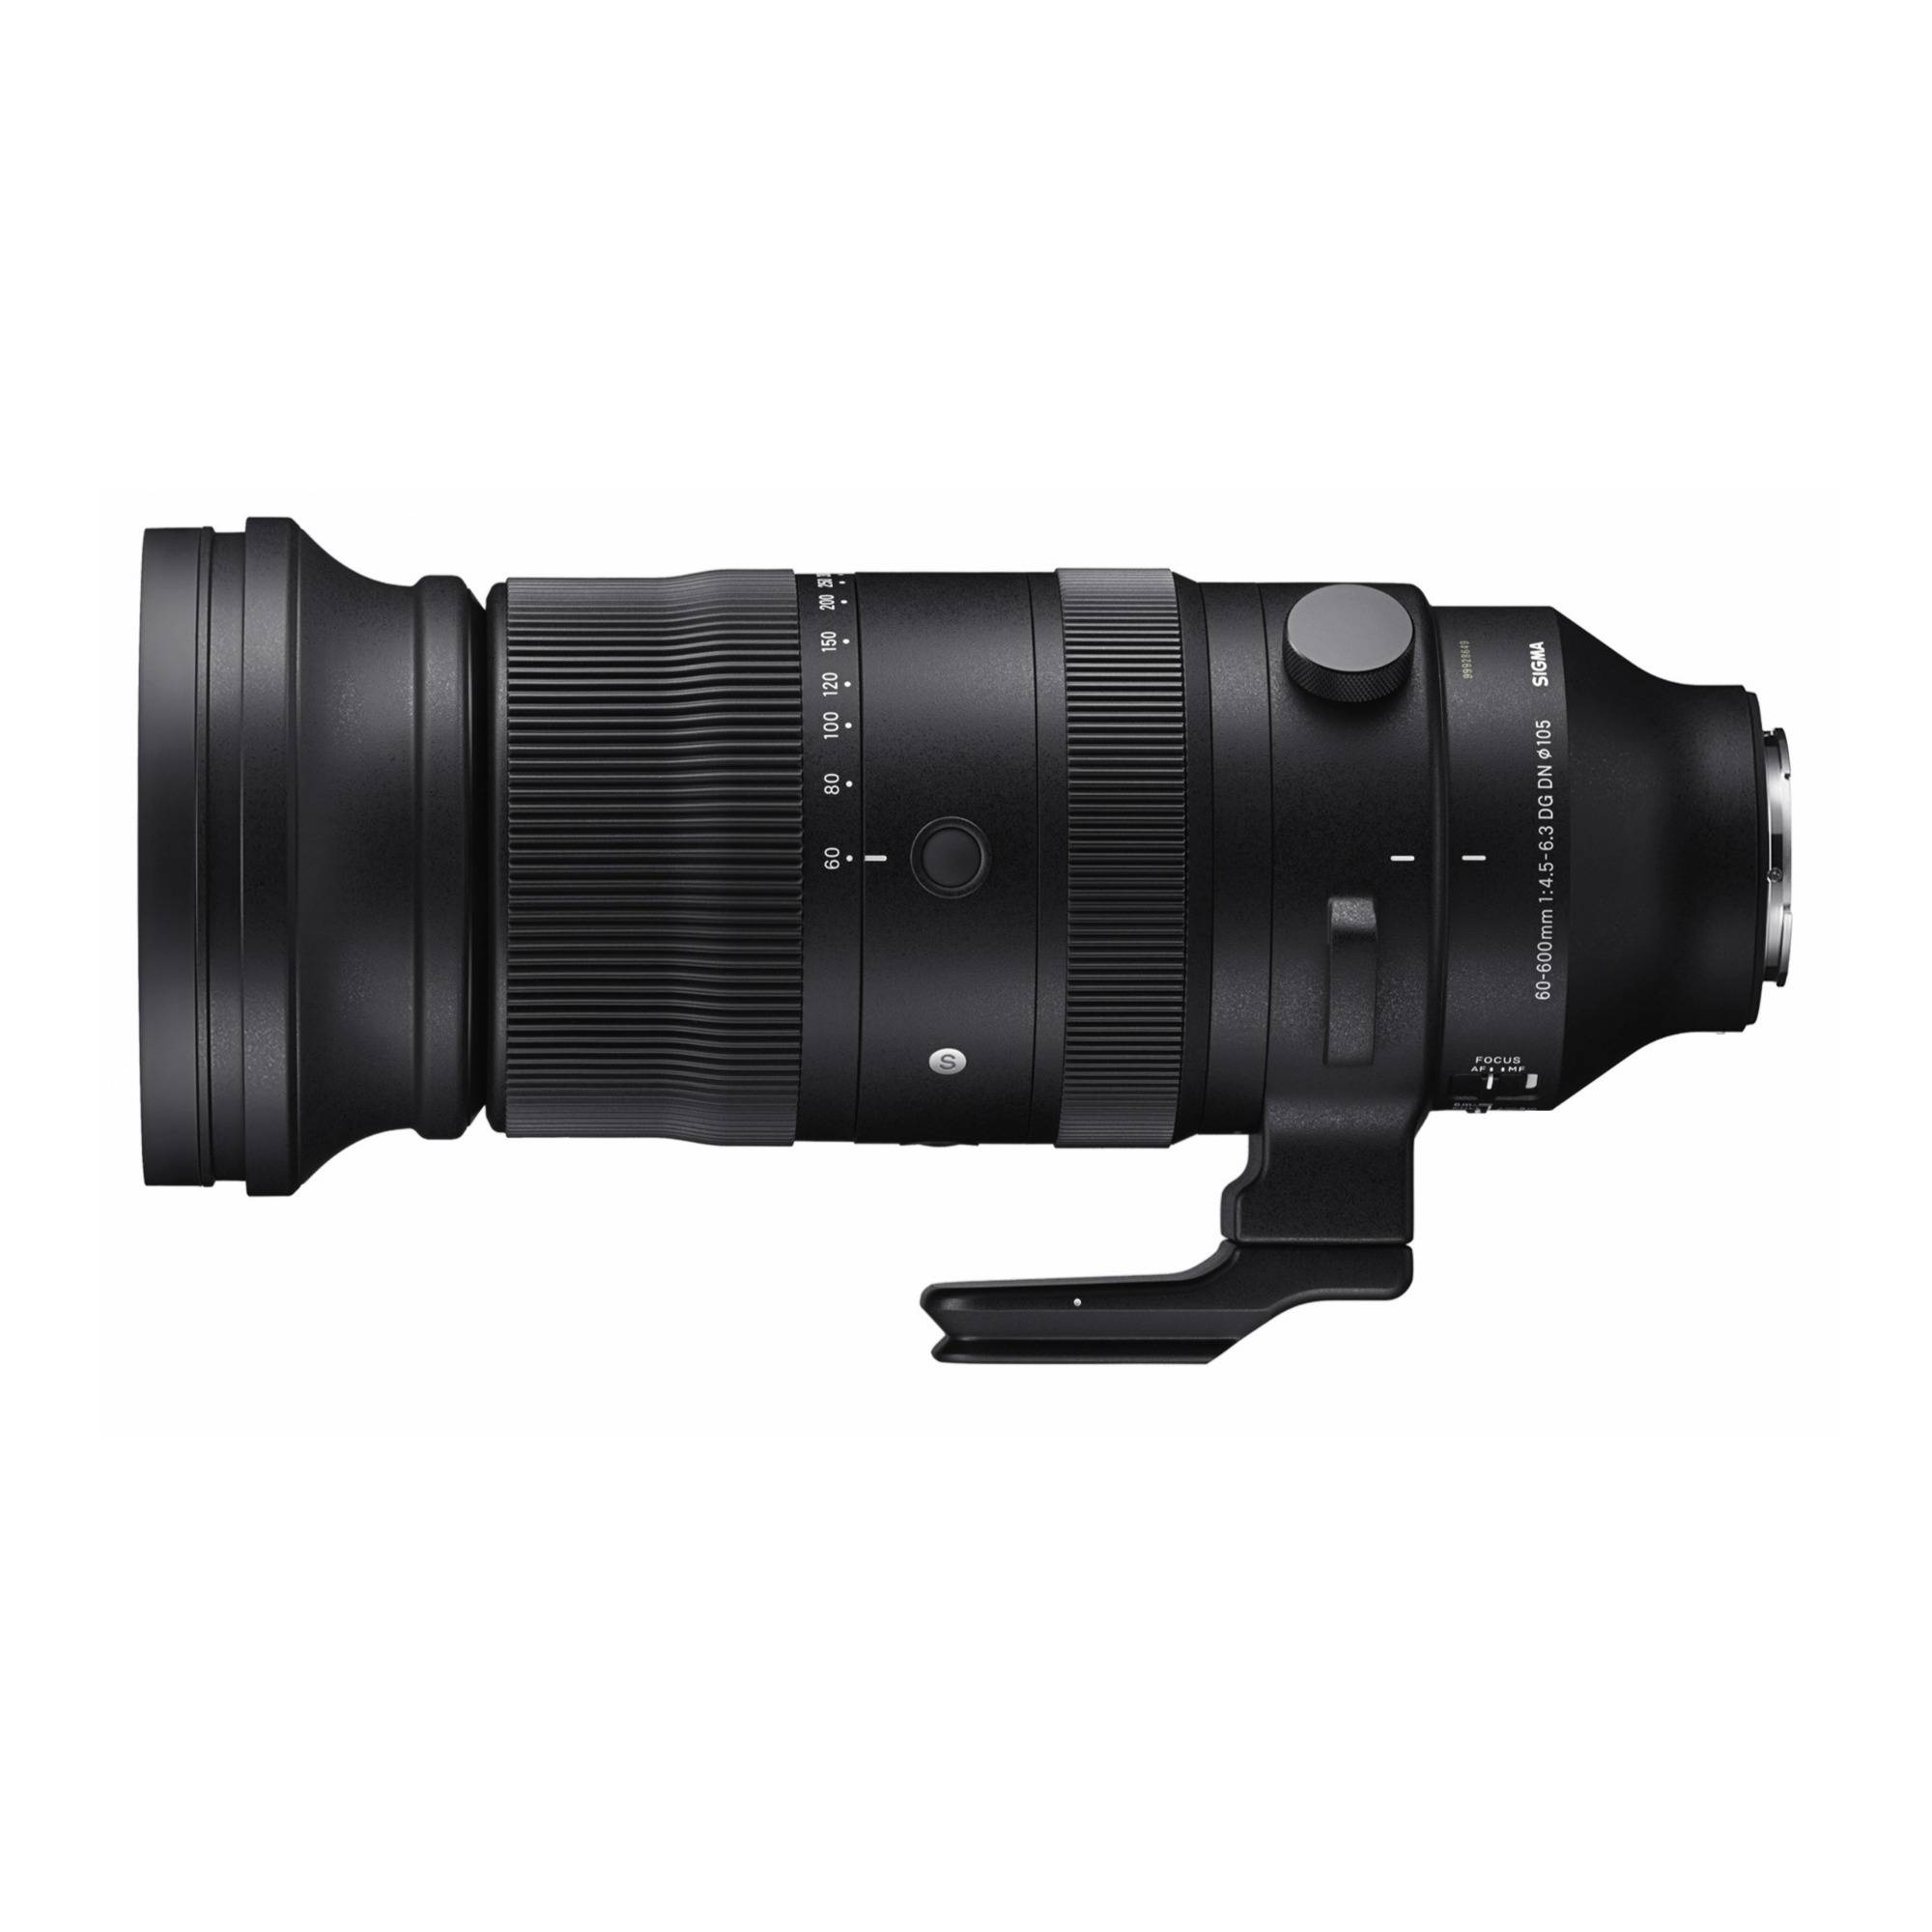 Sigma 60-600mm F4.5-6.3 DG DN OS Sports Lens for Sony E Mount with 10X Zoom